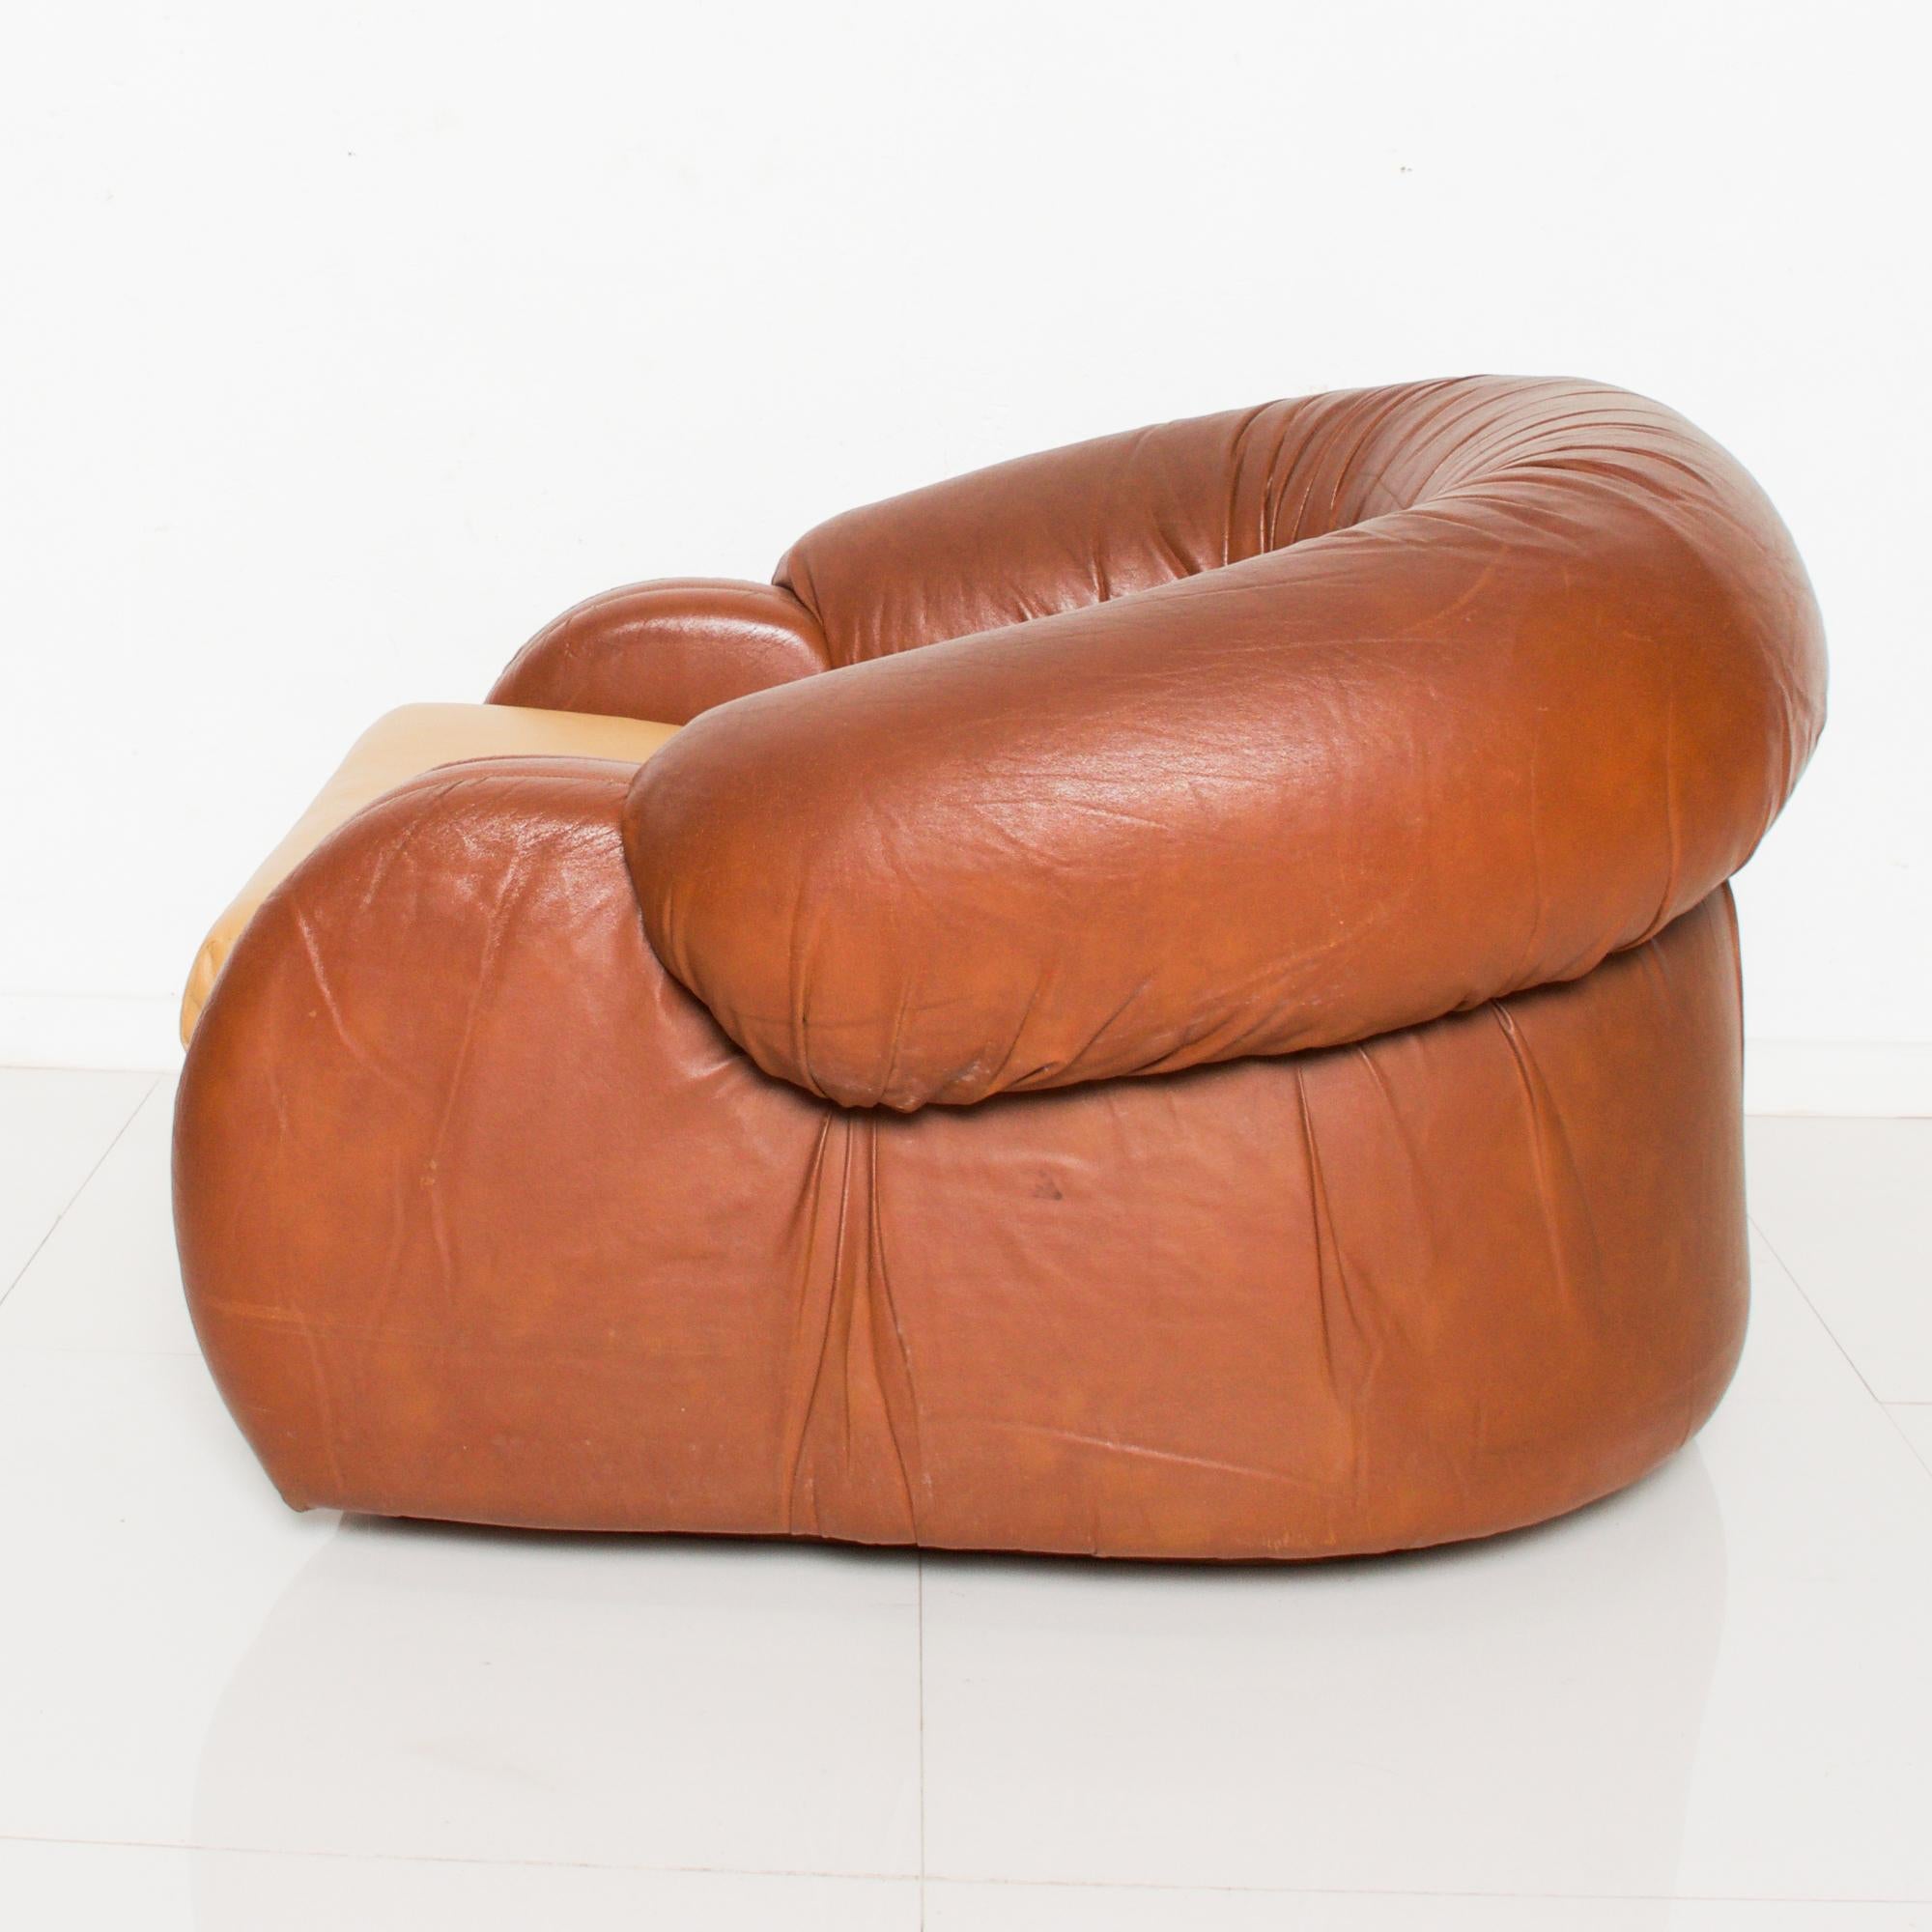 Poltrona Pair of Cognac Leather Lounge Chairs by Giuseppe Munari 1960s Italy 1